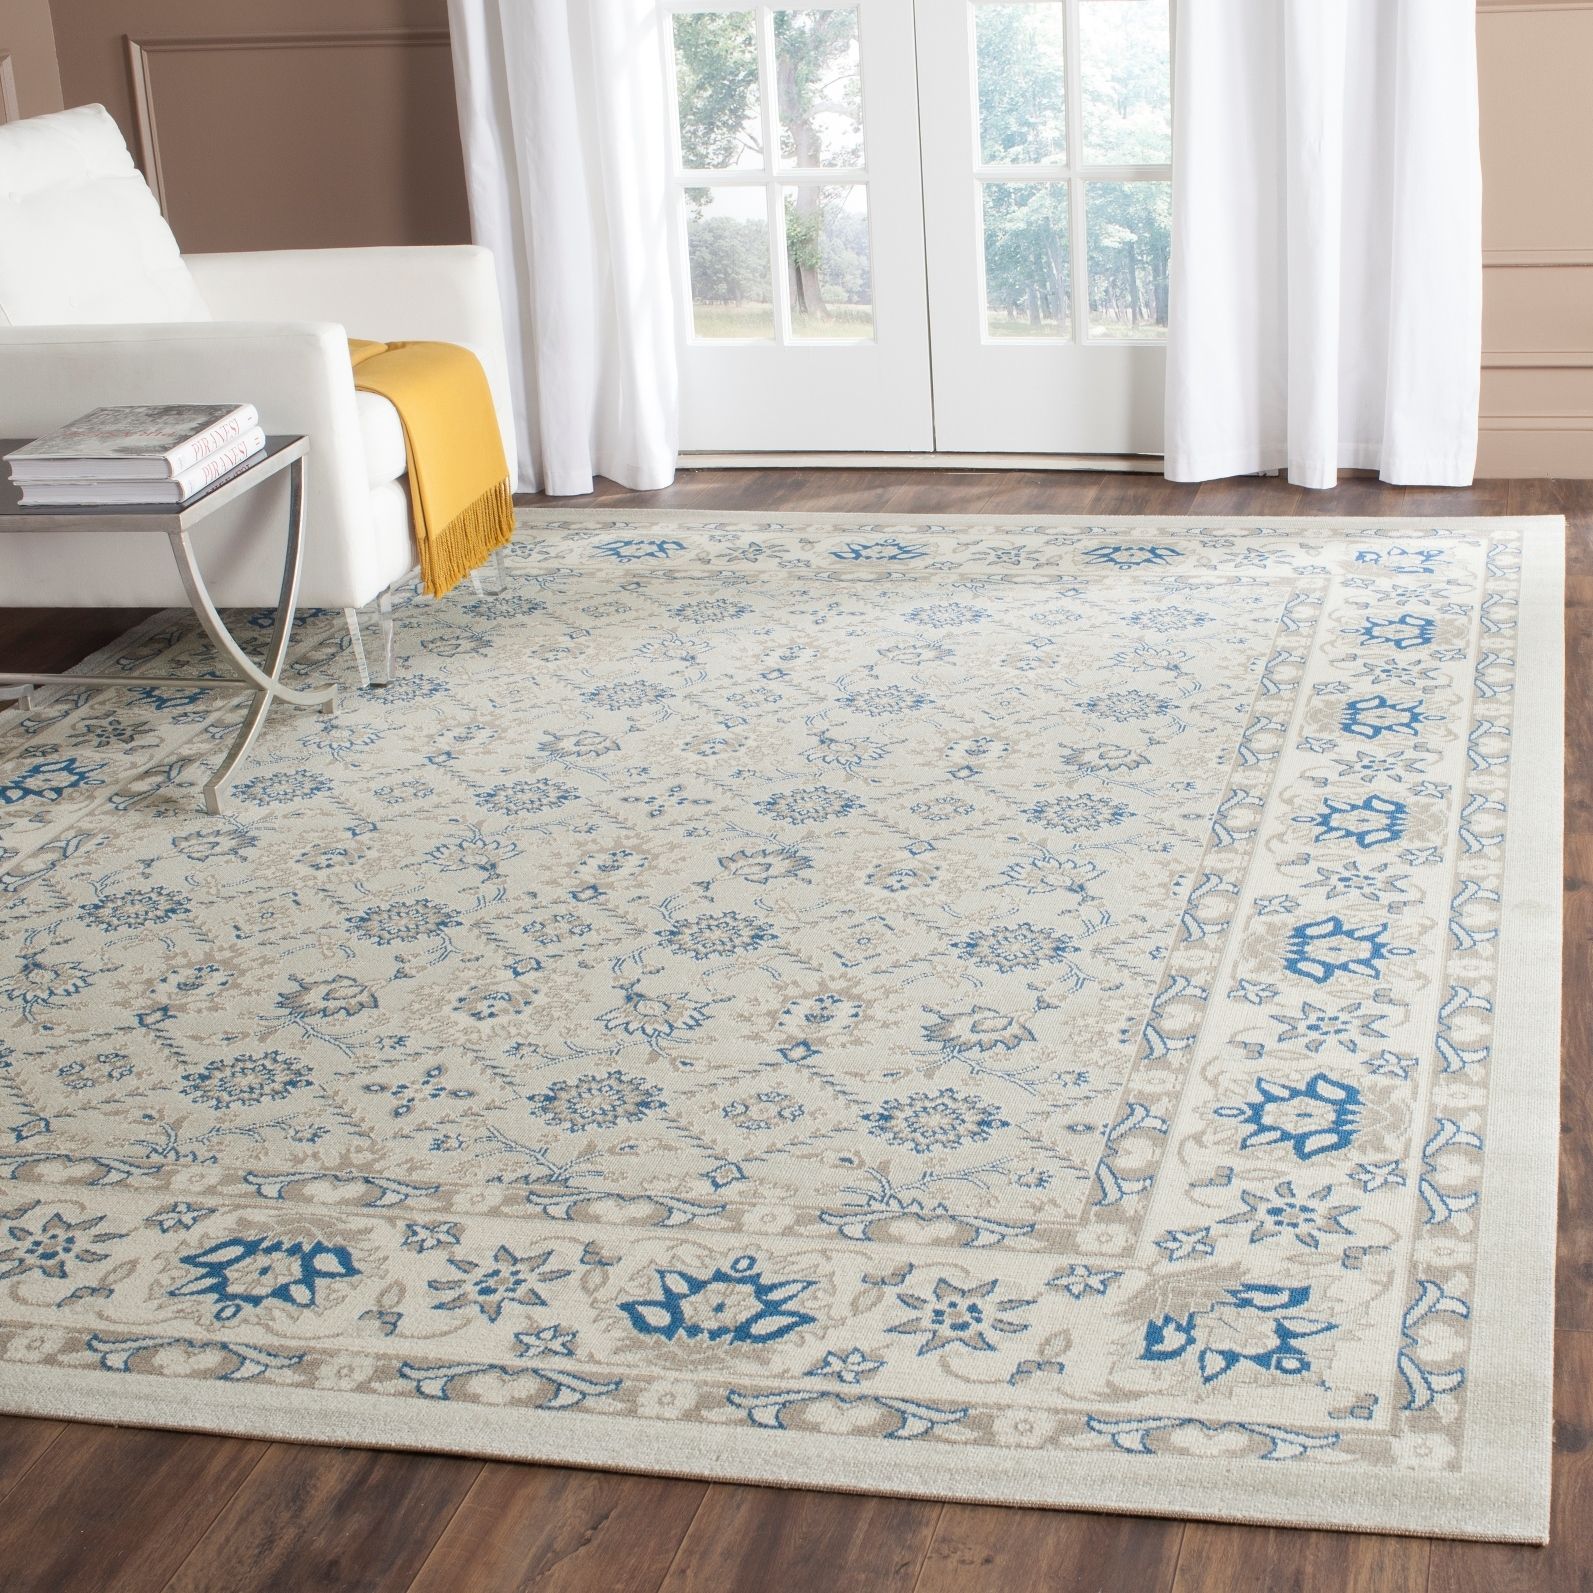 Sensational Design Cotton Area Rug Fresh Decoration Turquoise And For Non Wool Area Rugs (Photo 2 of 15)